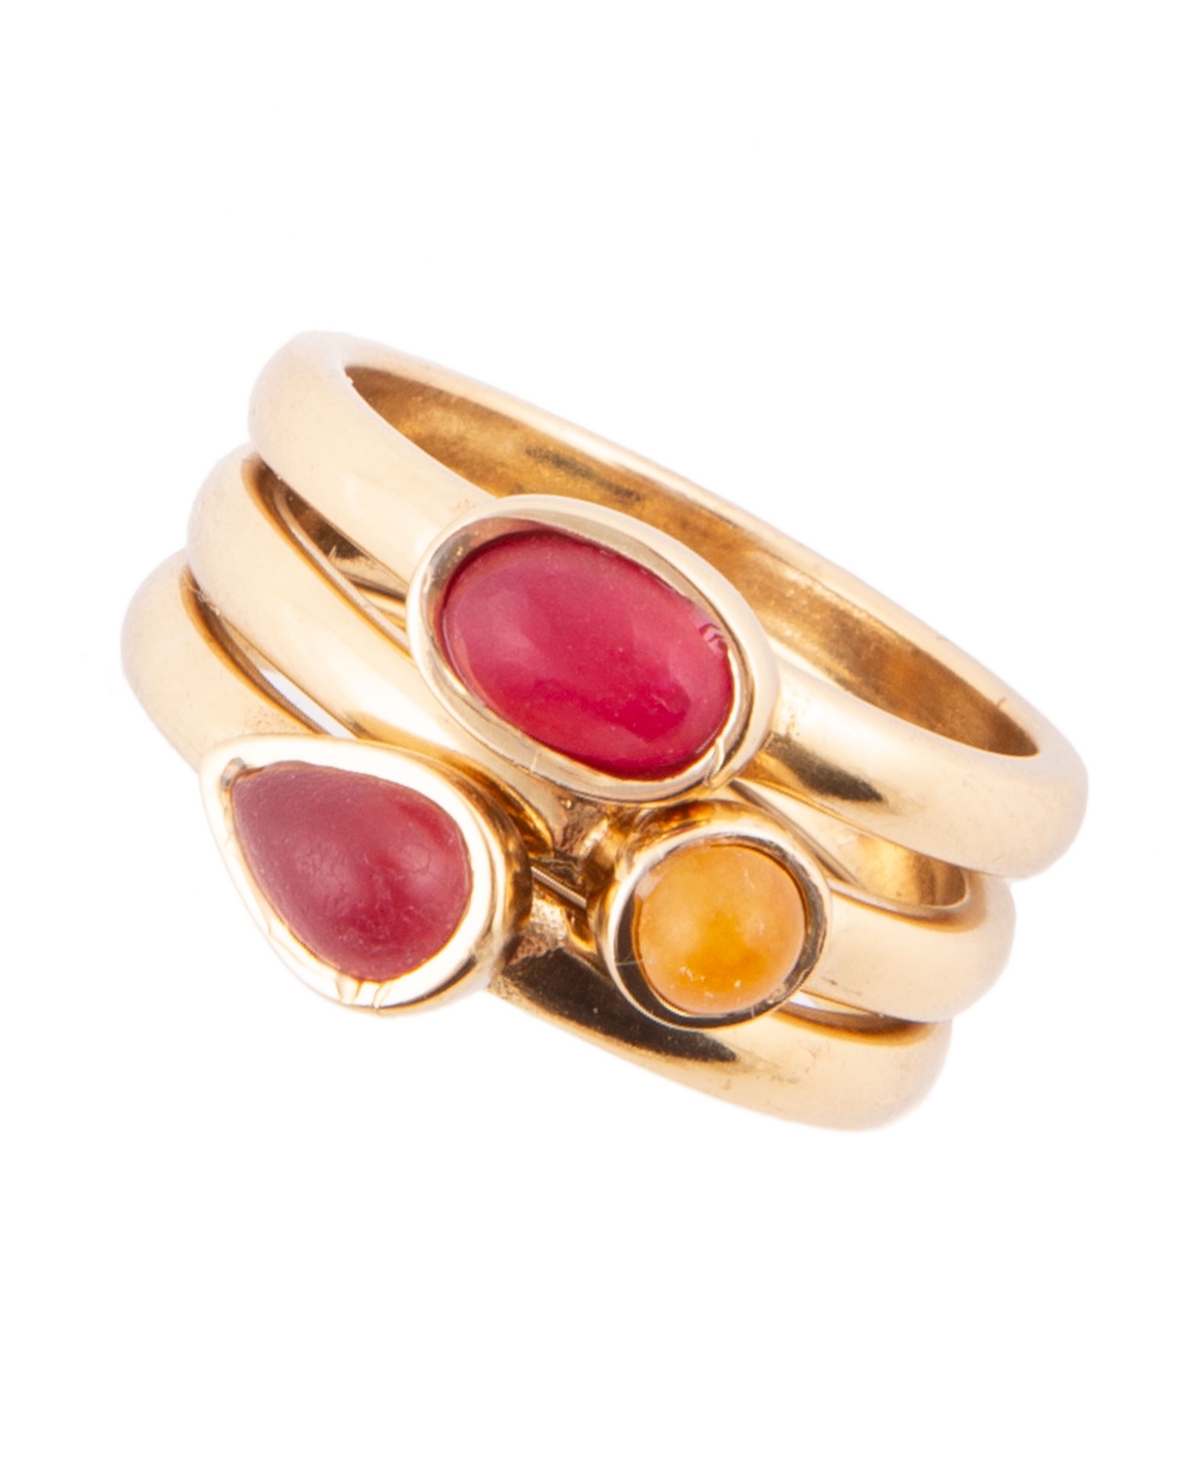 Stackable Genuine Yellow and Red Agate Ring Set - Genuine red and yellow agate